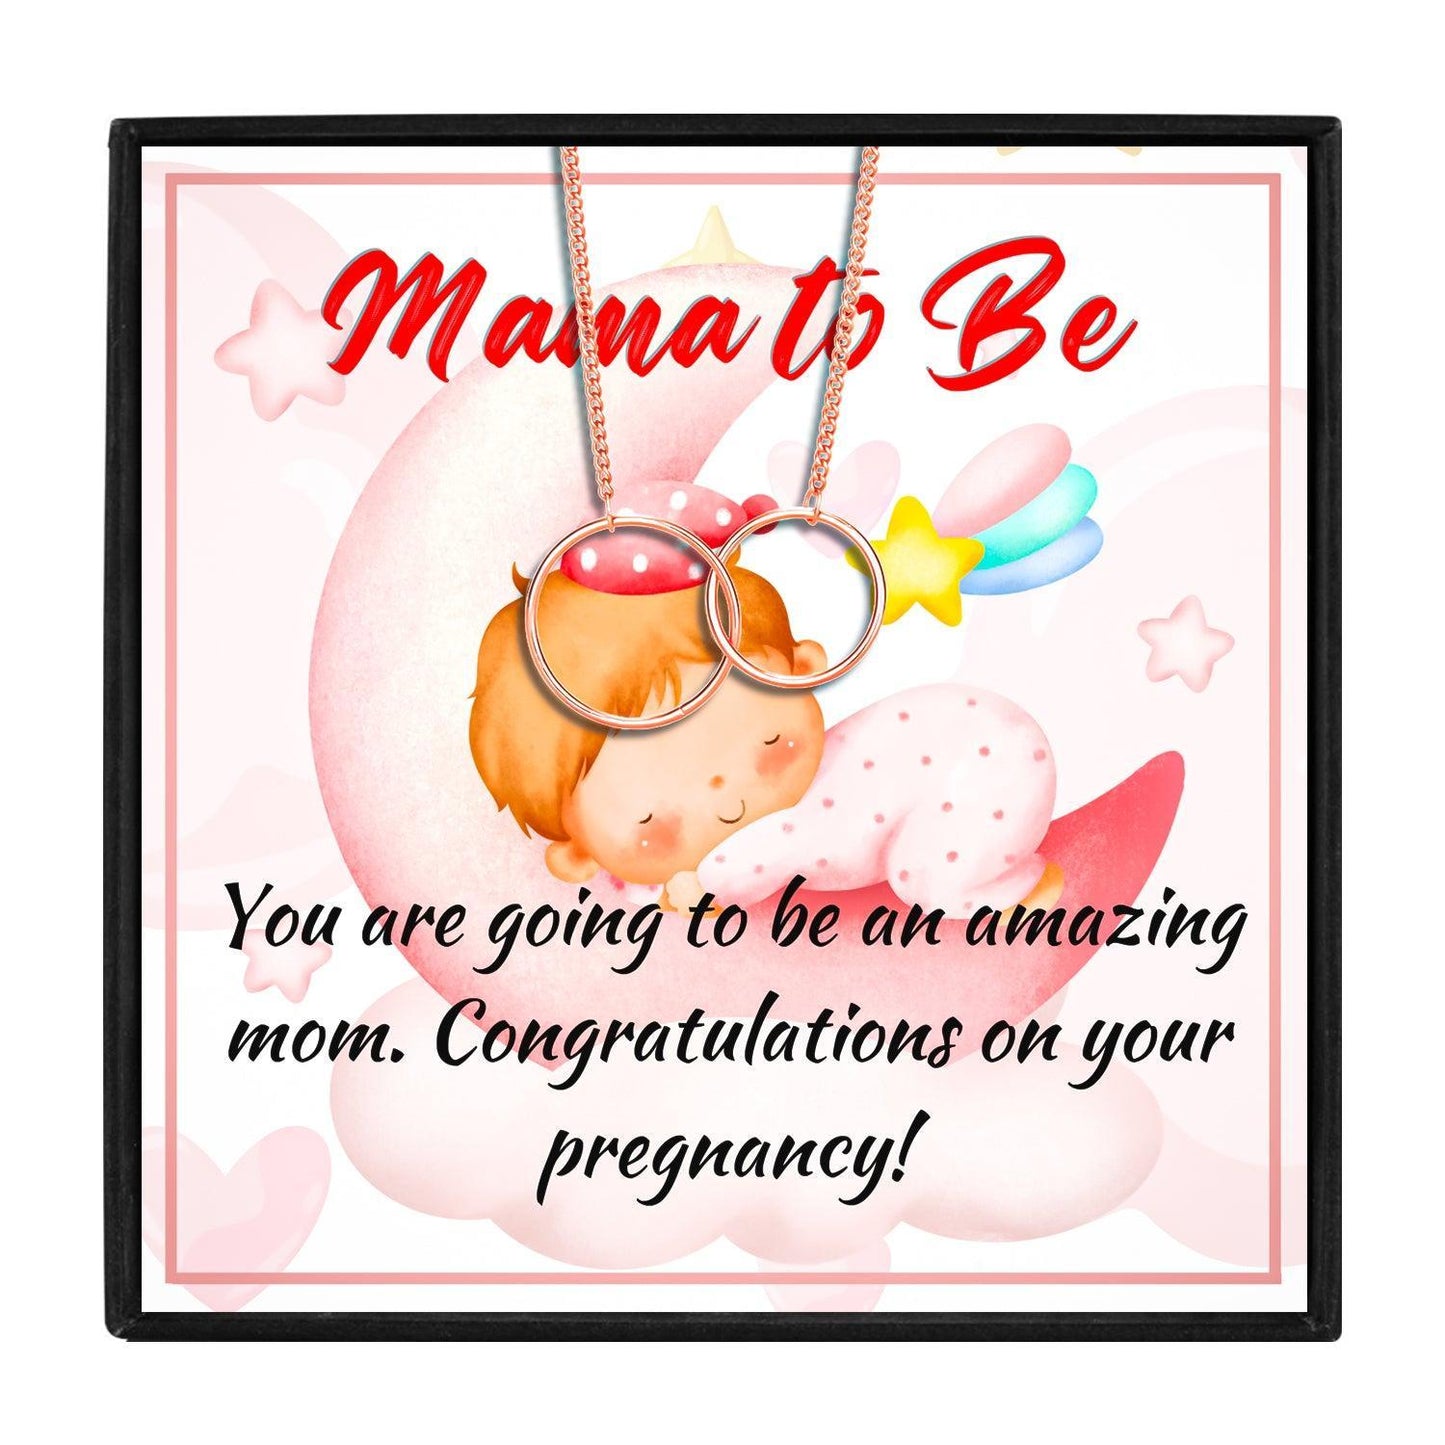 Gift Necklace For Pregnant Women To Give in 2023 | Gift Necklace For Pregnant Women To Give - undefined | Gifts for Pregnant Women, mama to be necklace, mom to be necklace, Mommy To Be Necklace, New Mom Jewelry | From Hunny Life | hunnylife.com